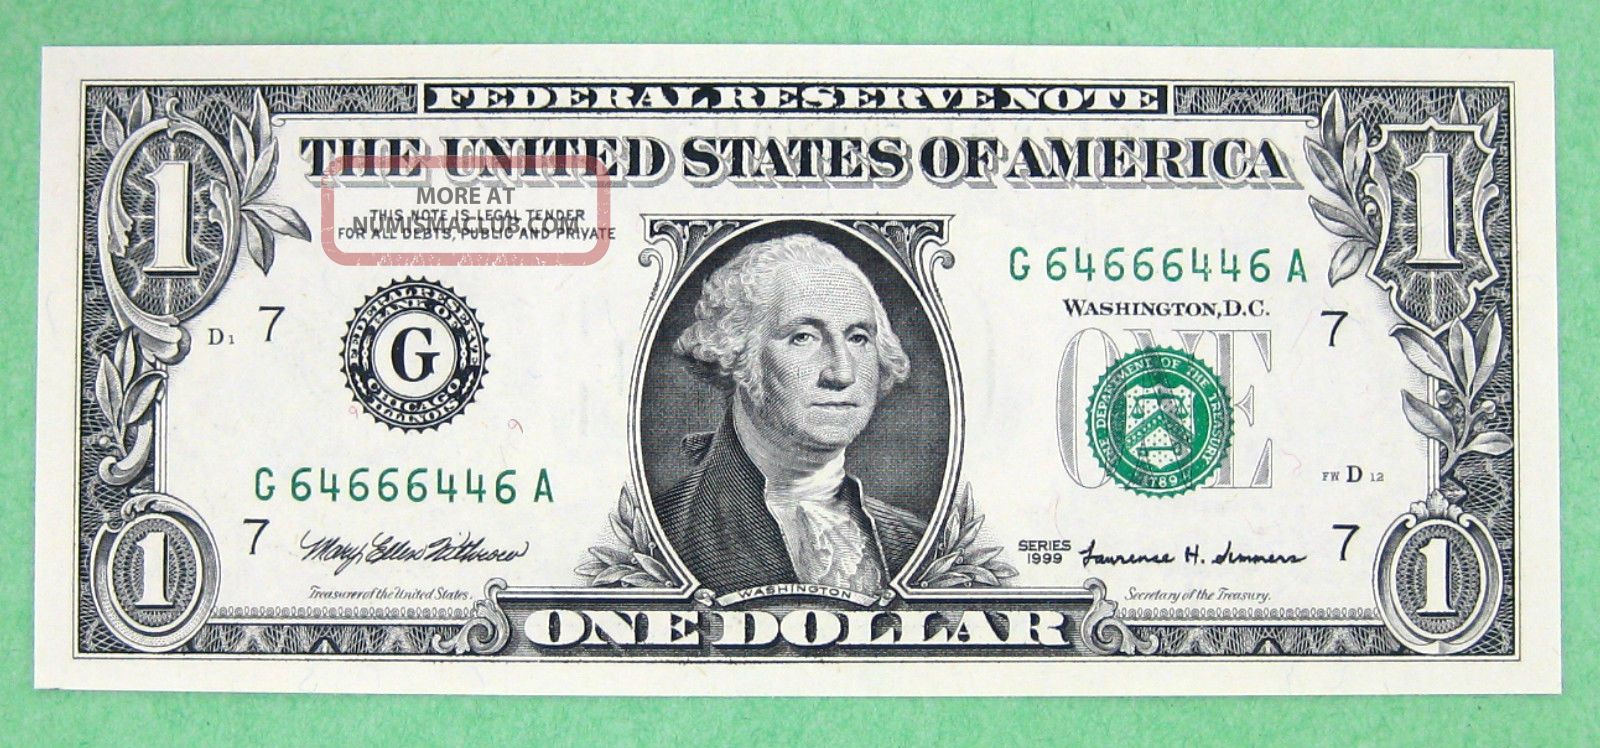 64666446 Fancy Binary Serial Number $1 1999 Gem Cu More Currency 4 Ap Small Size Notes photo